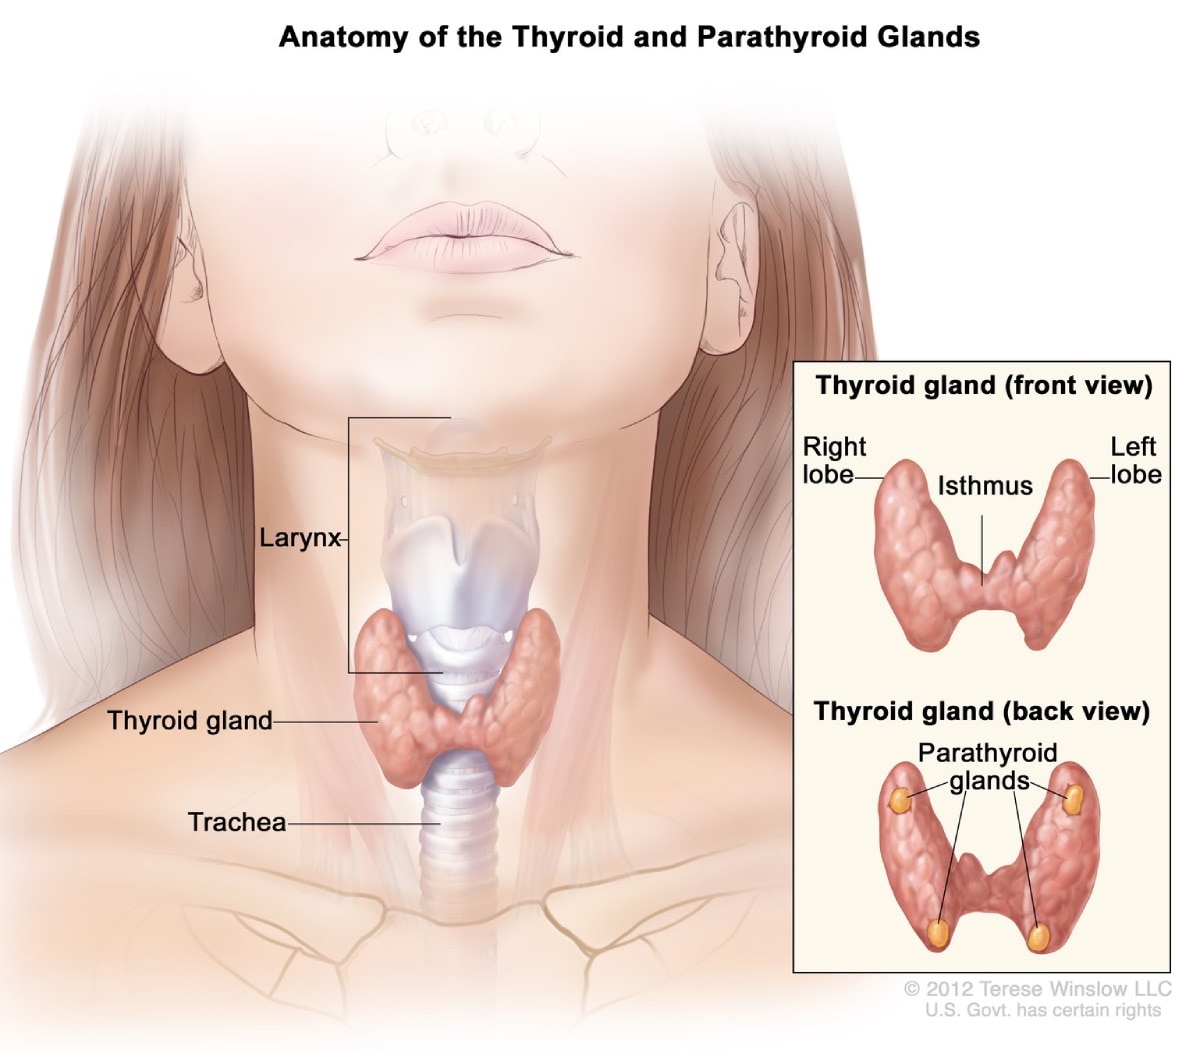 Illustration of a human neck, showing that the thyroid gland is located between the larynx and trachea. An inset shows a front view and a back view of the thyroid gland, including the location of the left lobe, right lobe, isthmus, and parathyroid glands.